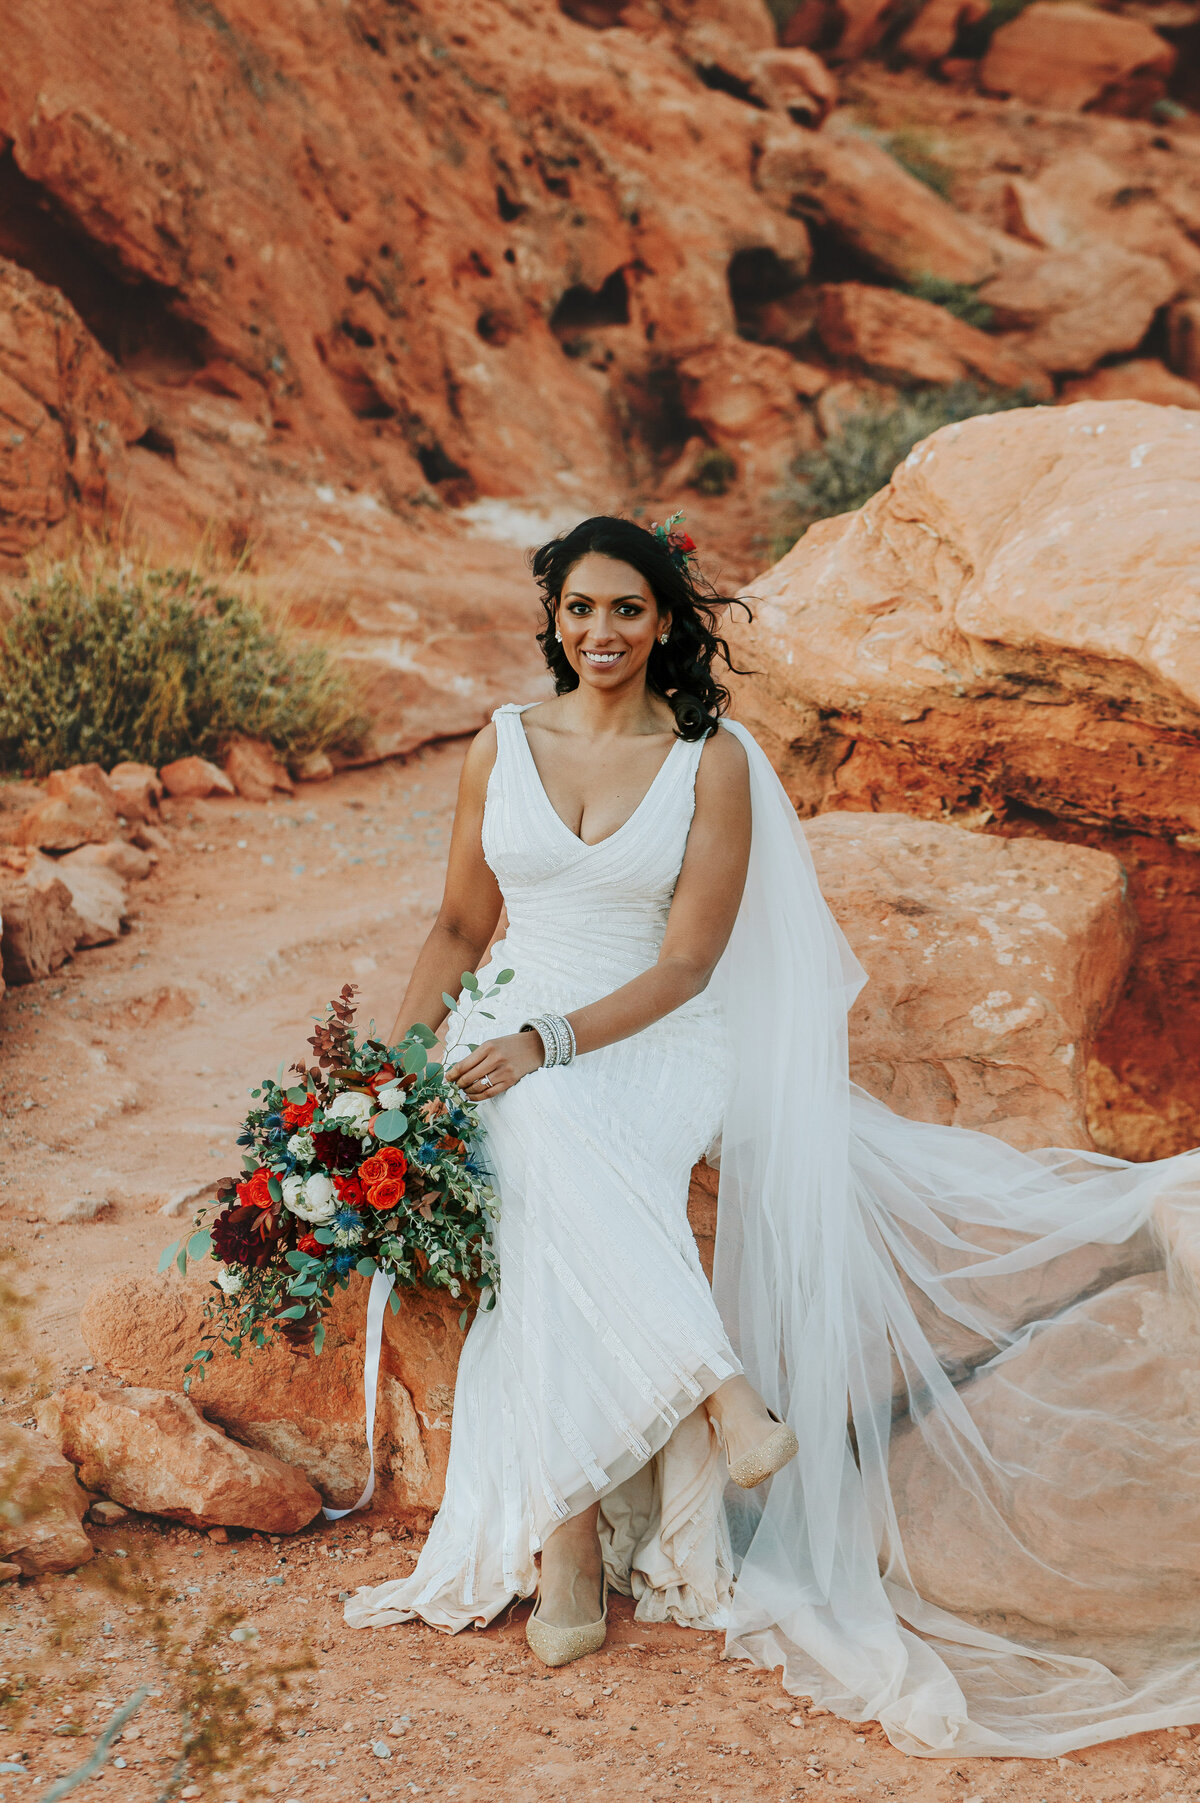 Cactus and Lace Las Vegas Desert Wedding Location Valley of Fire2